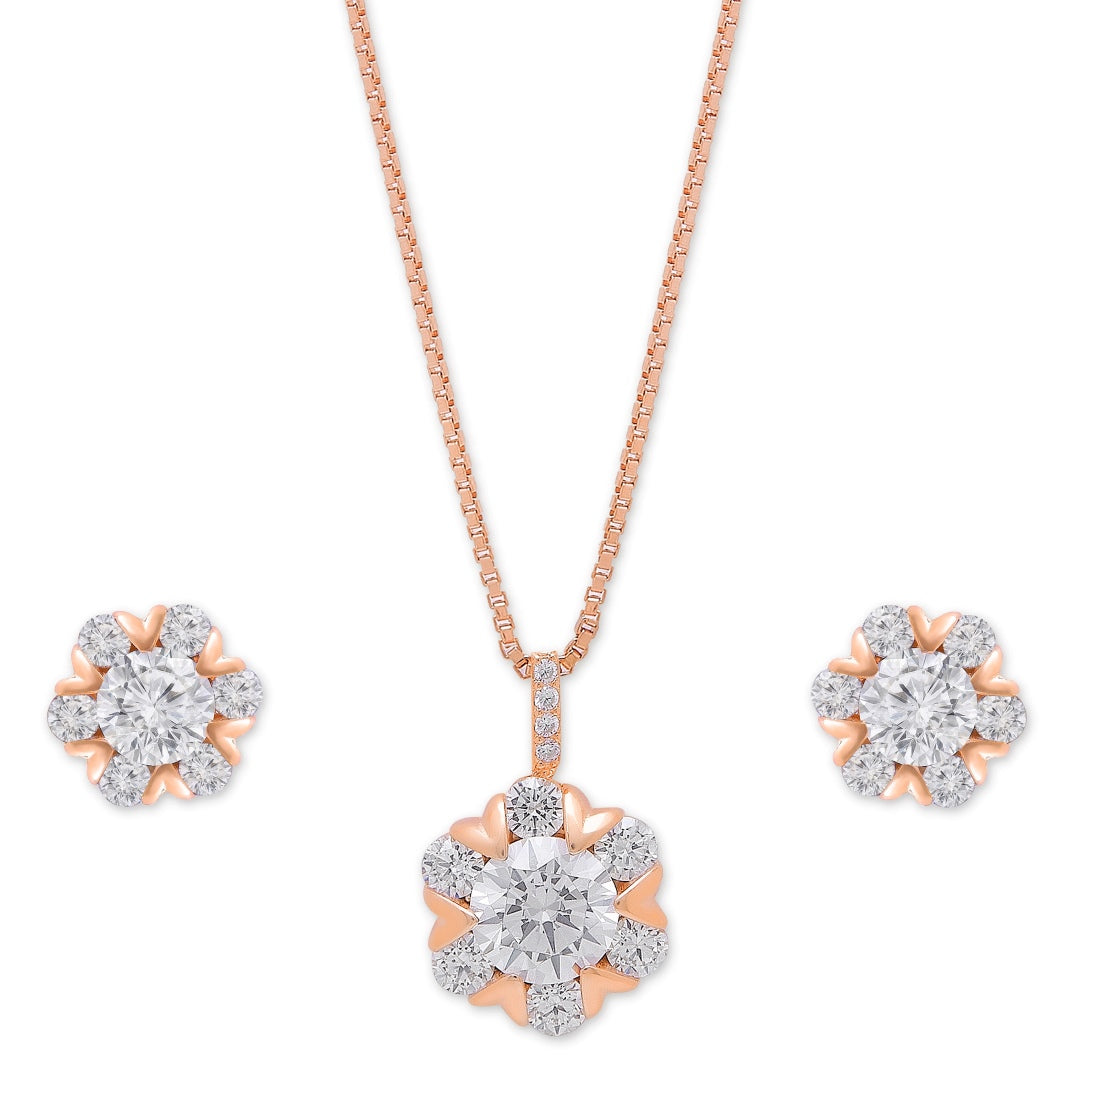 Blooms in Blush 925 Sterling Silver Rose Gold-Plated Jewelry Set